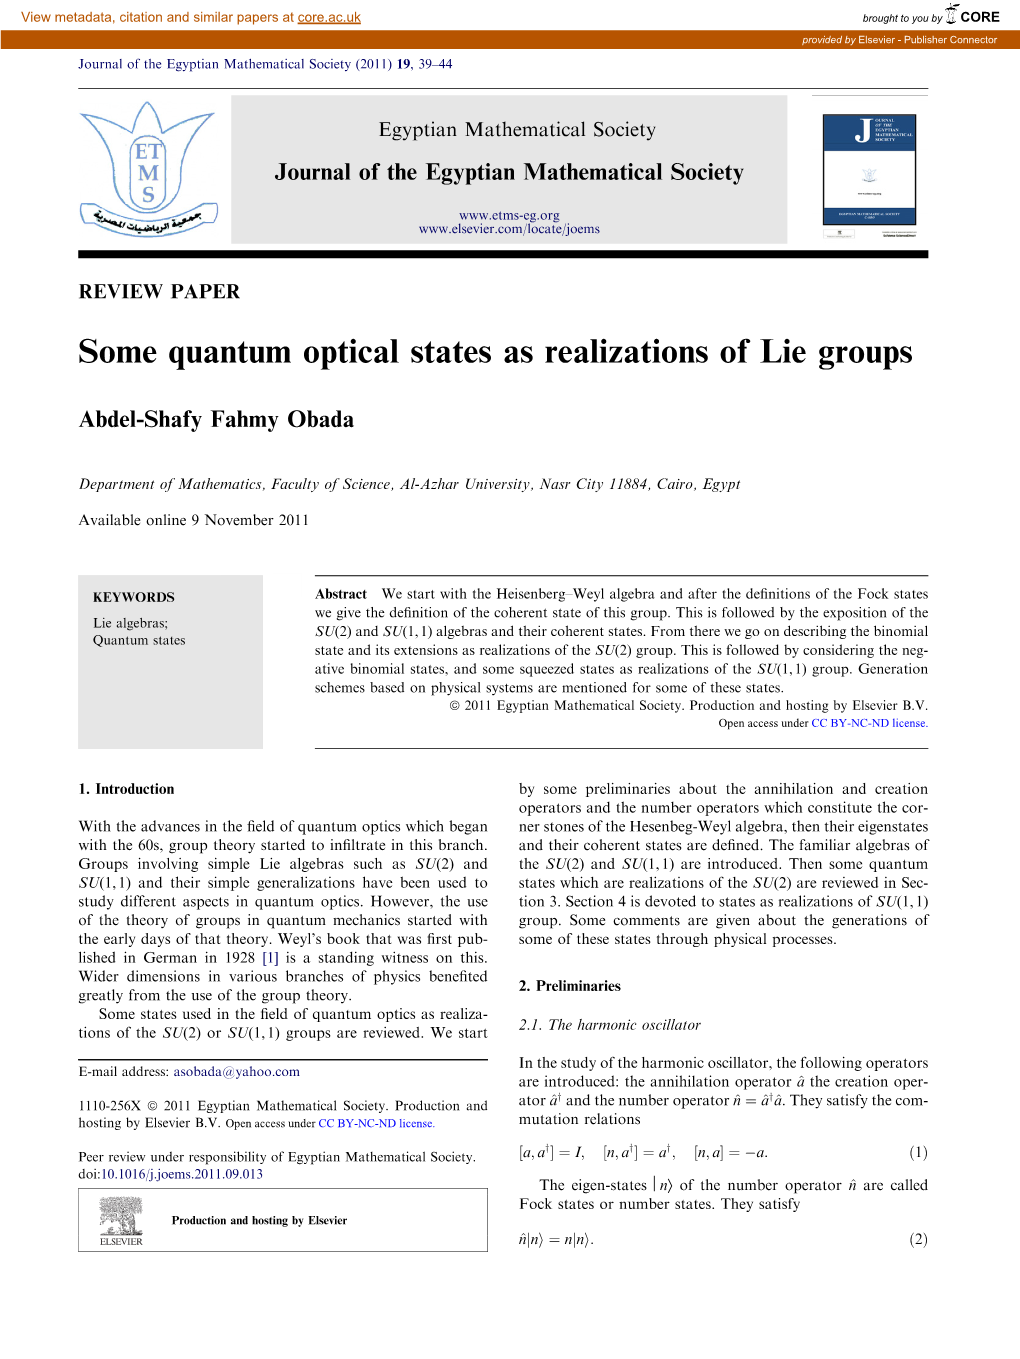 Some Quantum Optical States As Realizations of Lie Groups